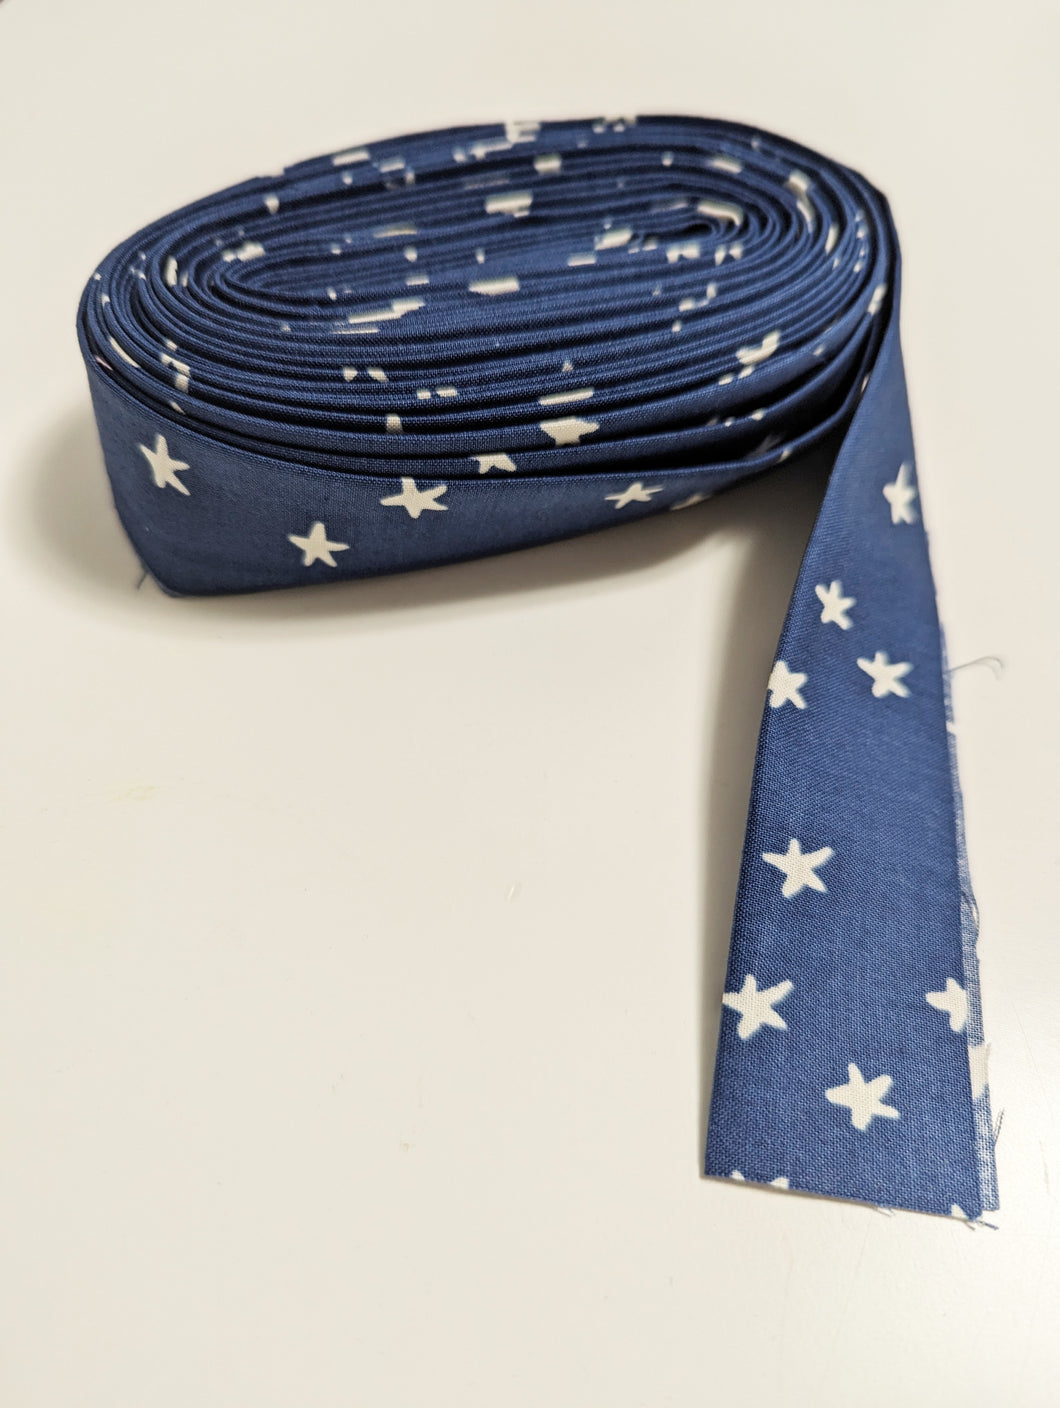 Quilt Binding - Starry Bluebell - 336 inches